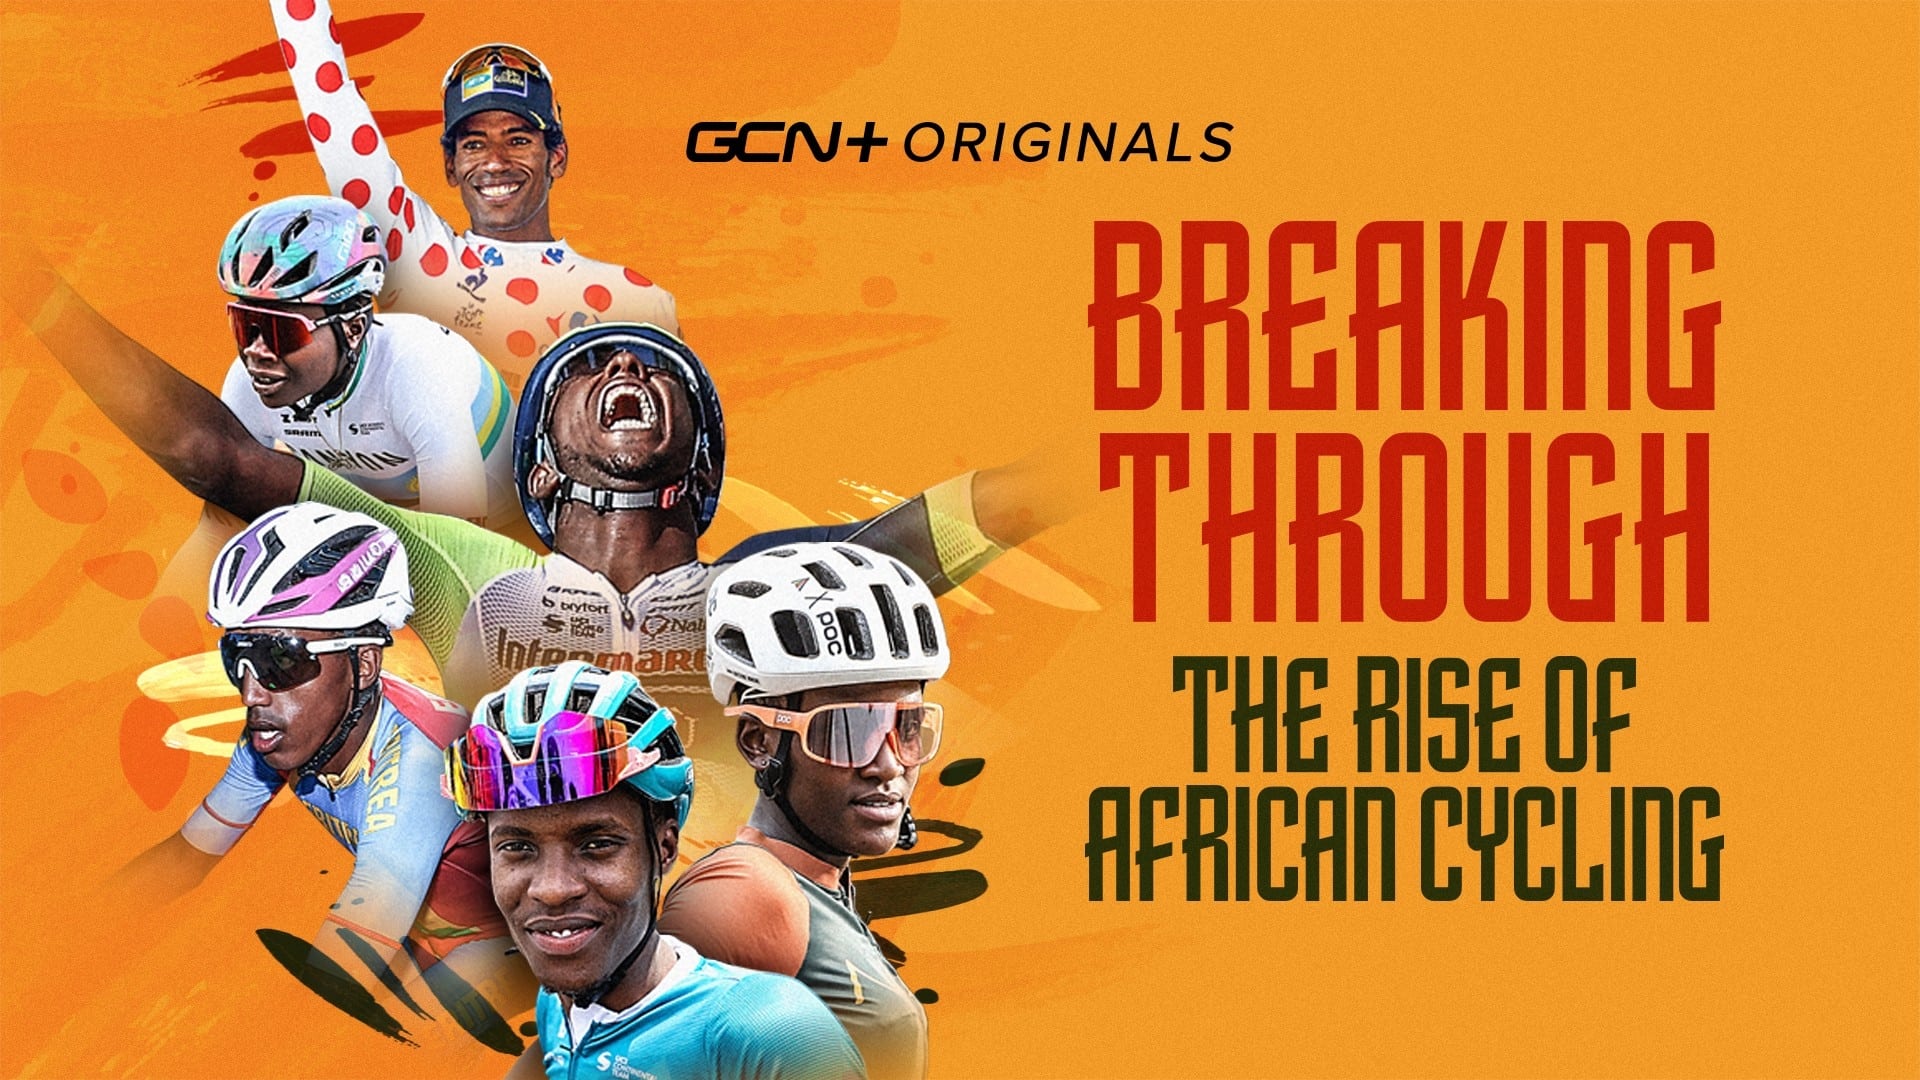 Breaking Through: The Rise of African Cycling (2023)